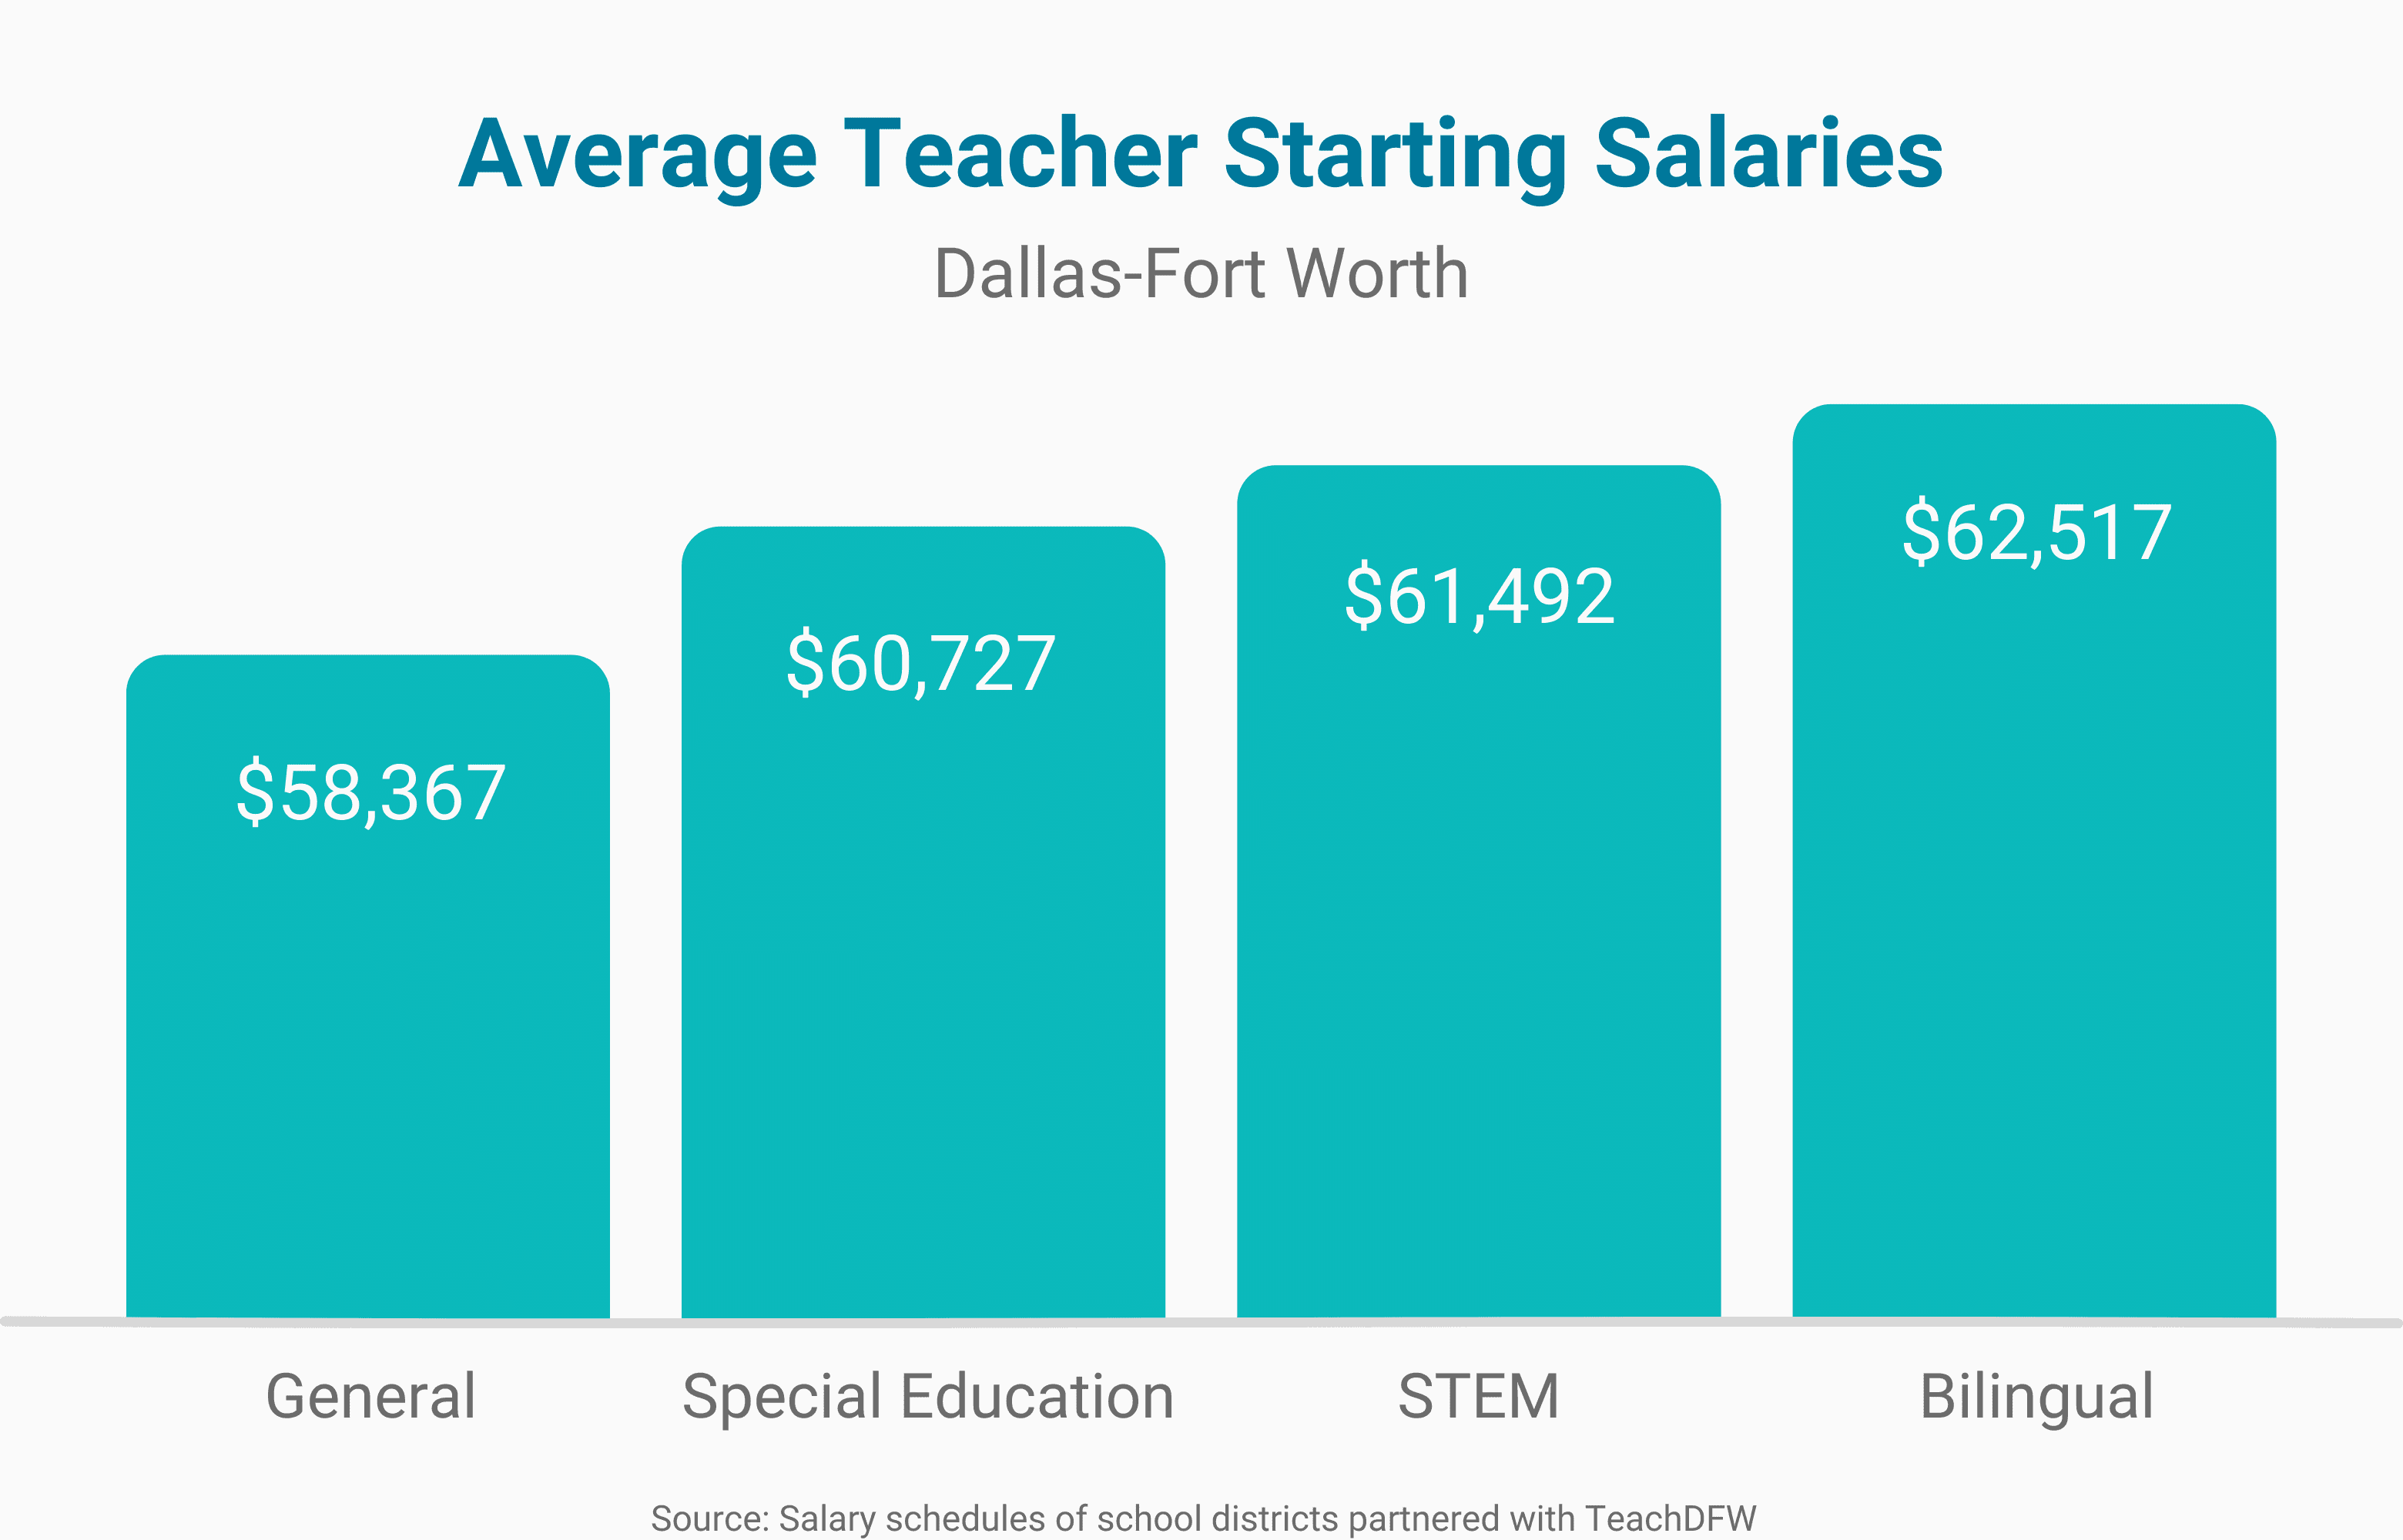 Bar graph of DFW teacher starting salaries. The chart says: General Teacher - $58,367; Special Education - $60,727; STEM - $61,492; Bilingual - $62,517. Source: Salary schedules of school districts partnered with TeachDFW. 